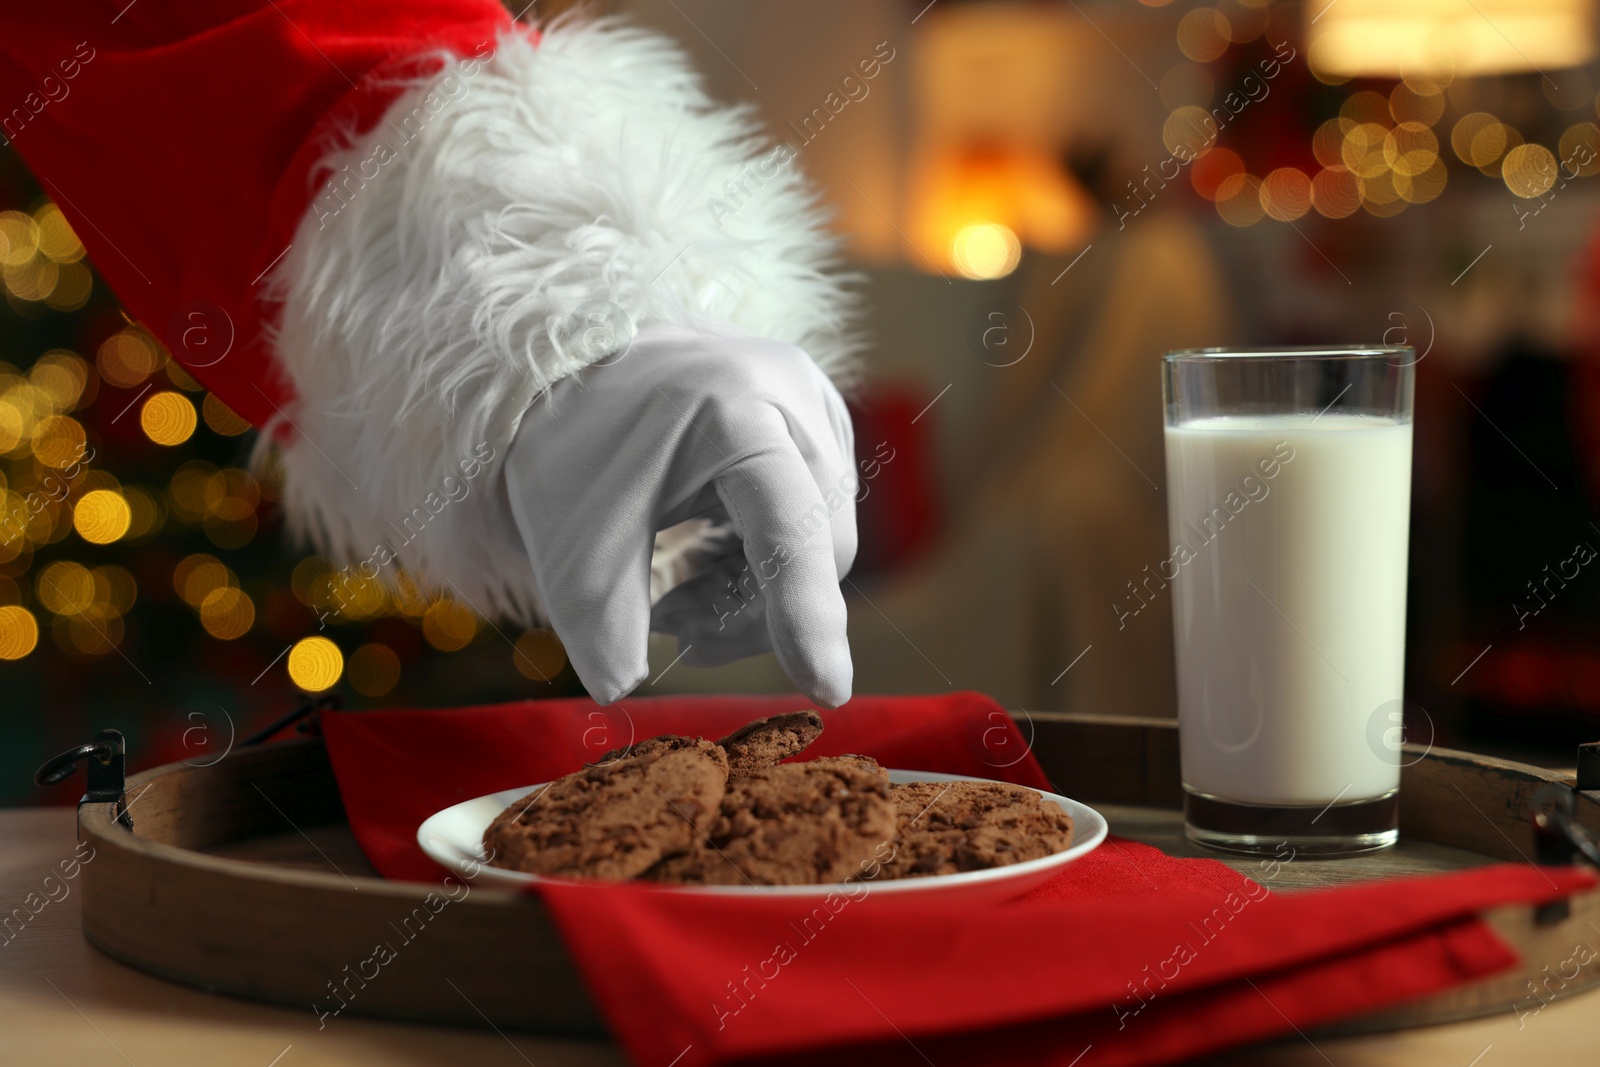 Photo of Merry Christmas. Santa Claus taking cookies from plate on table in room, closeup